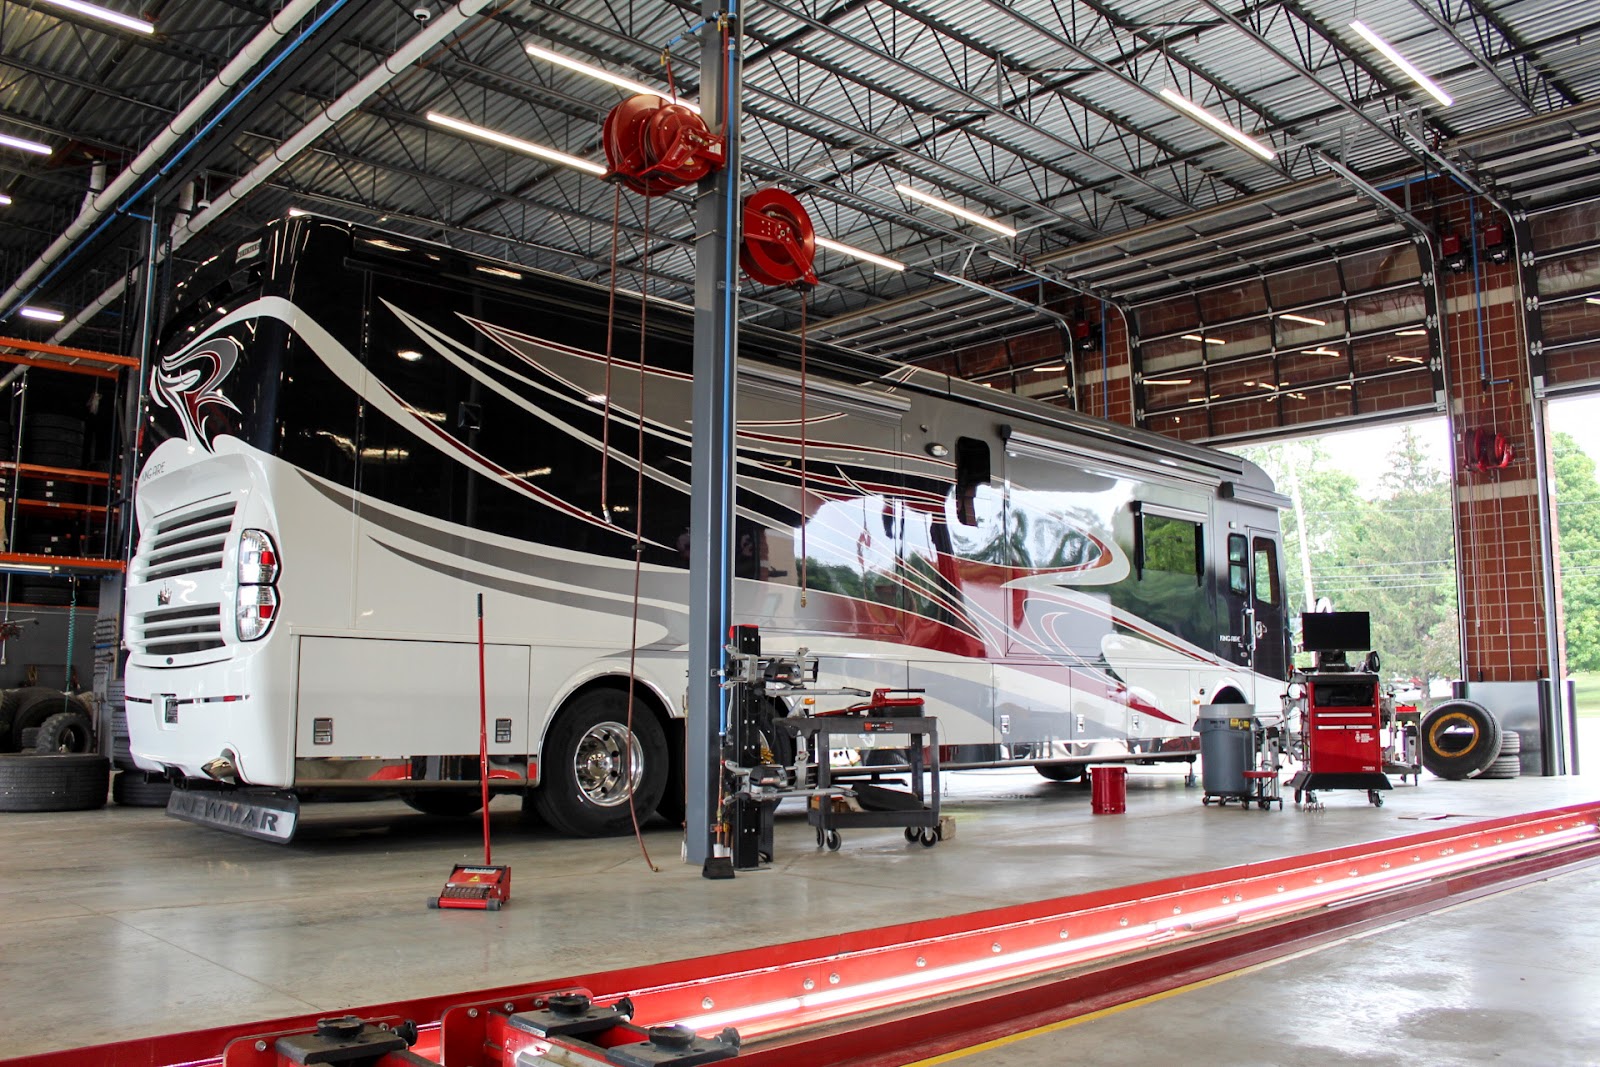 A red and black RV getting serviced at Wonderland Tire in Byron Center, MI.